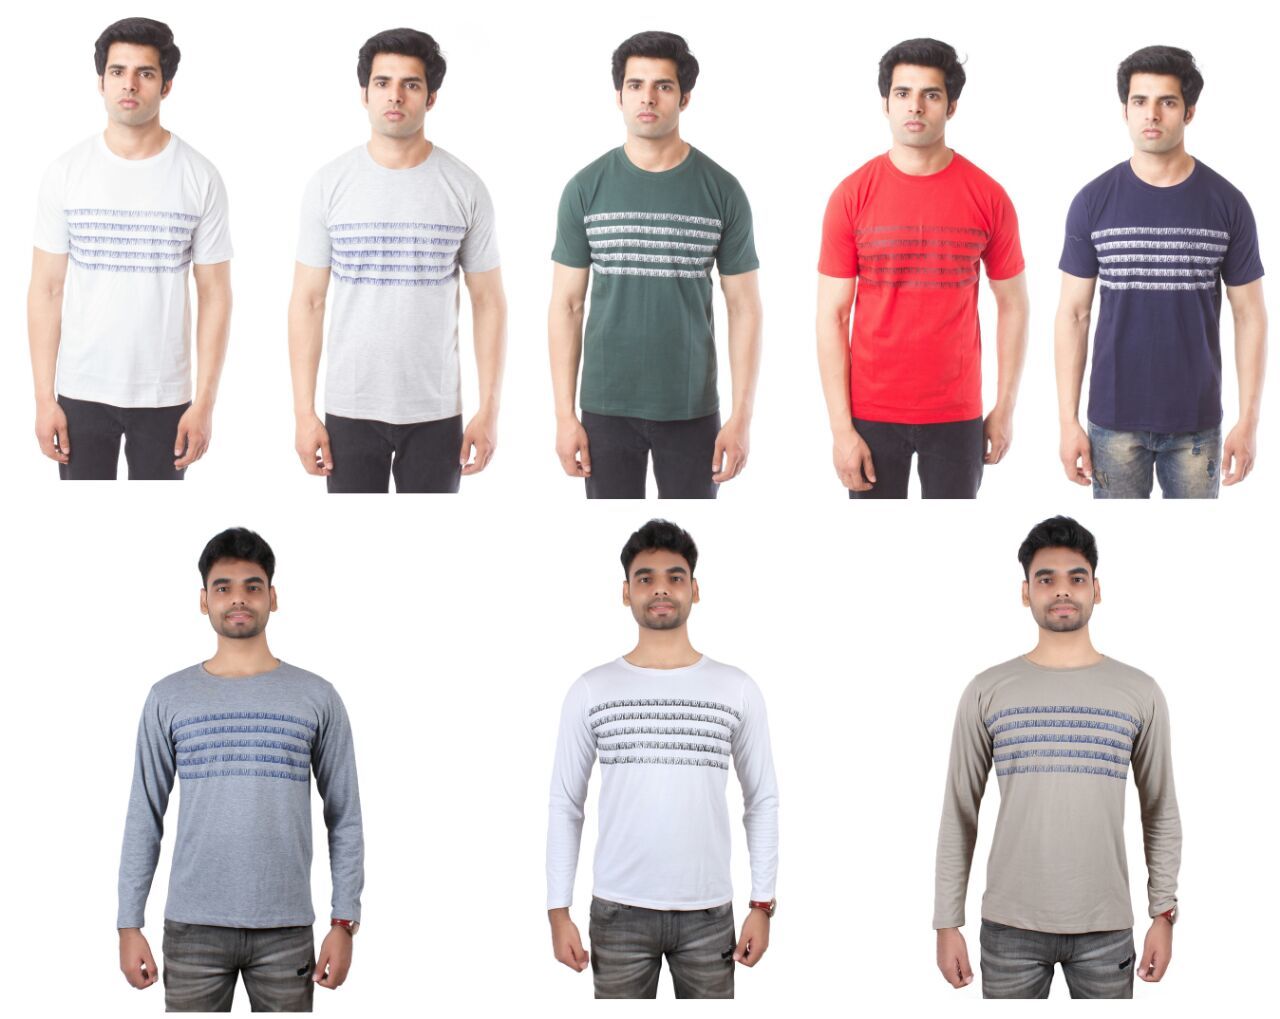 Branded Trifoi Tshirts with bill for resale in India